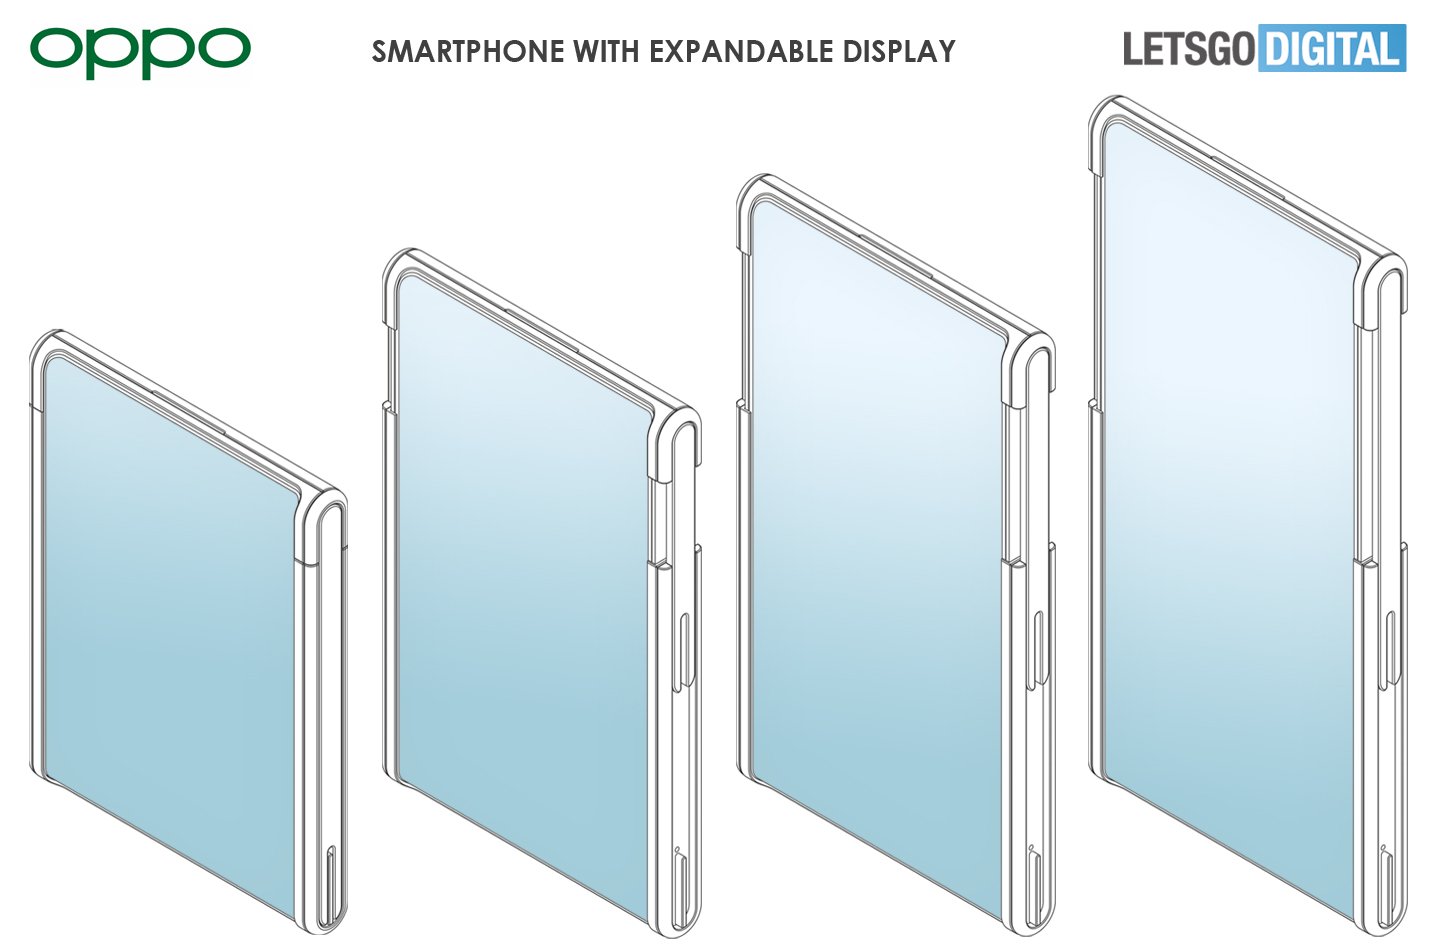 OPPO Extendable Display Smartphone Design Patent 01